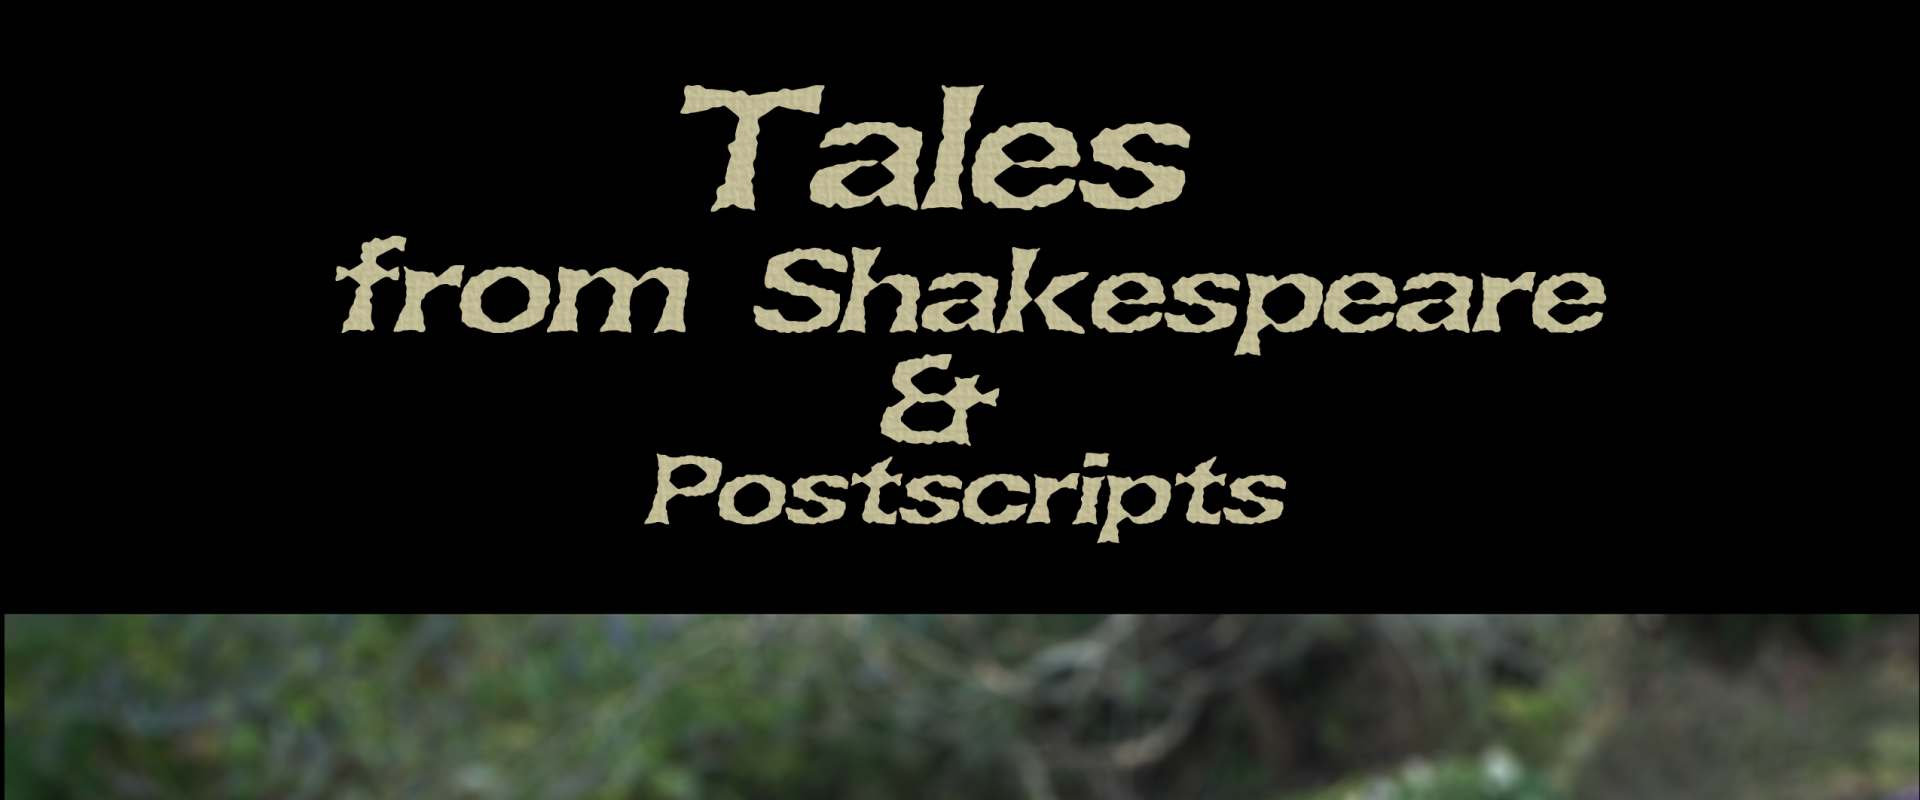 Tales from Shakespeare & Postscripts background 1